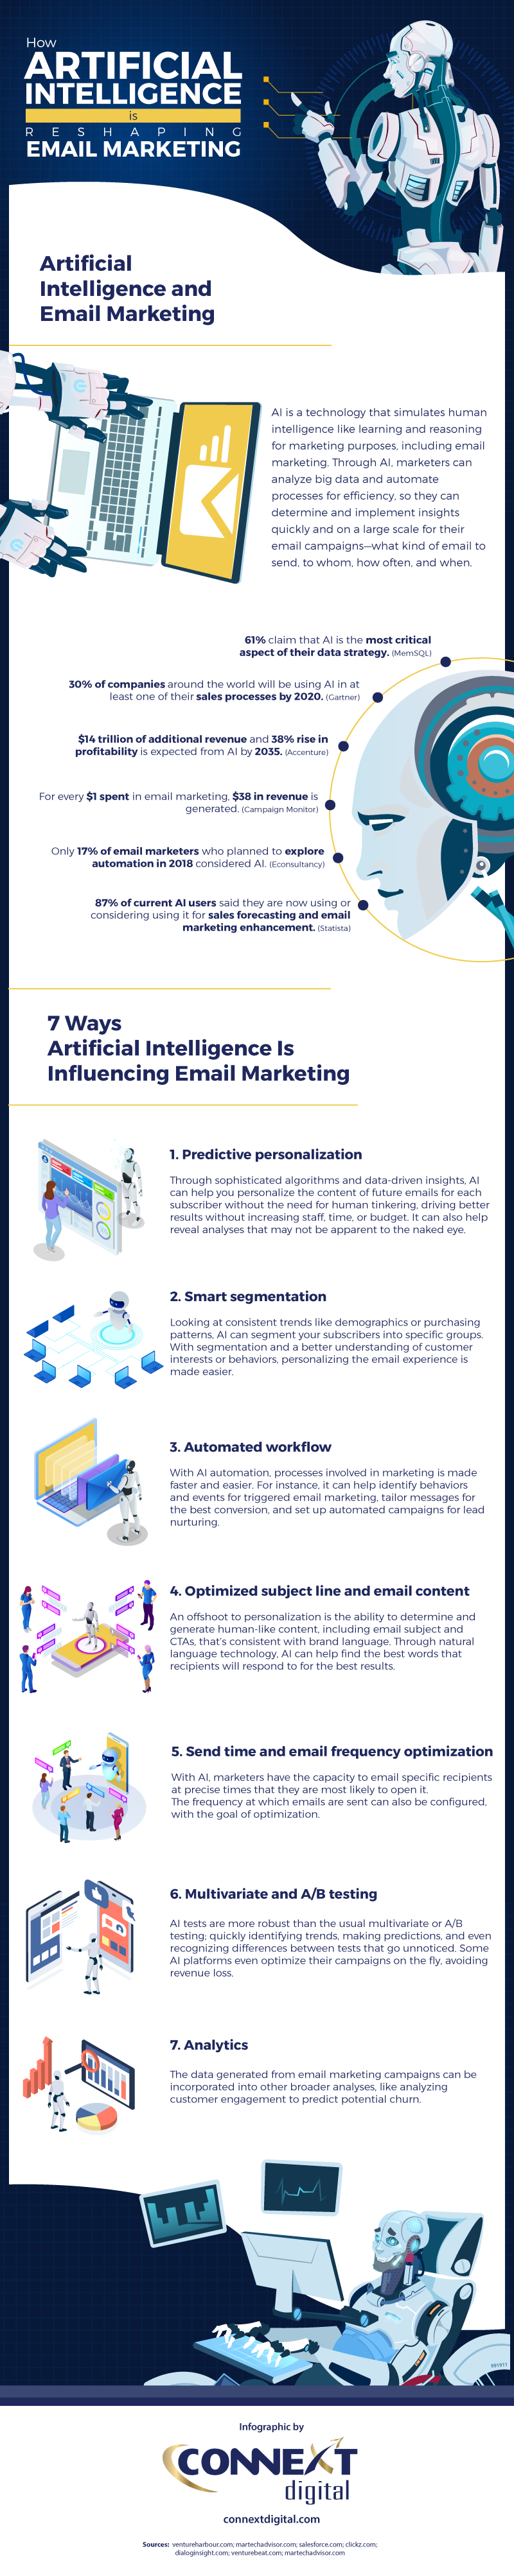 How Artificial Intelligence is Reshaping Email Marketing